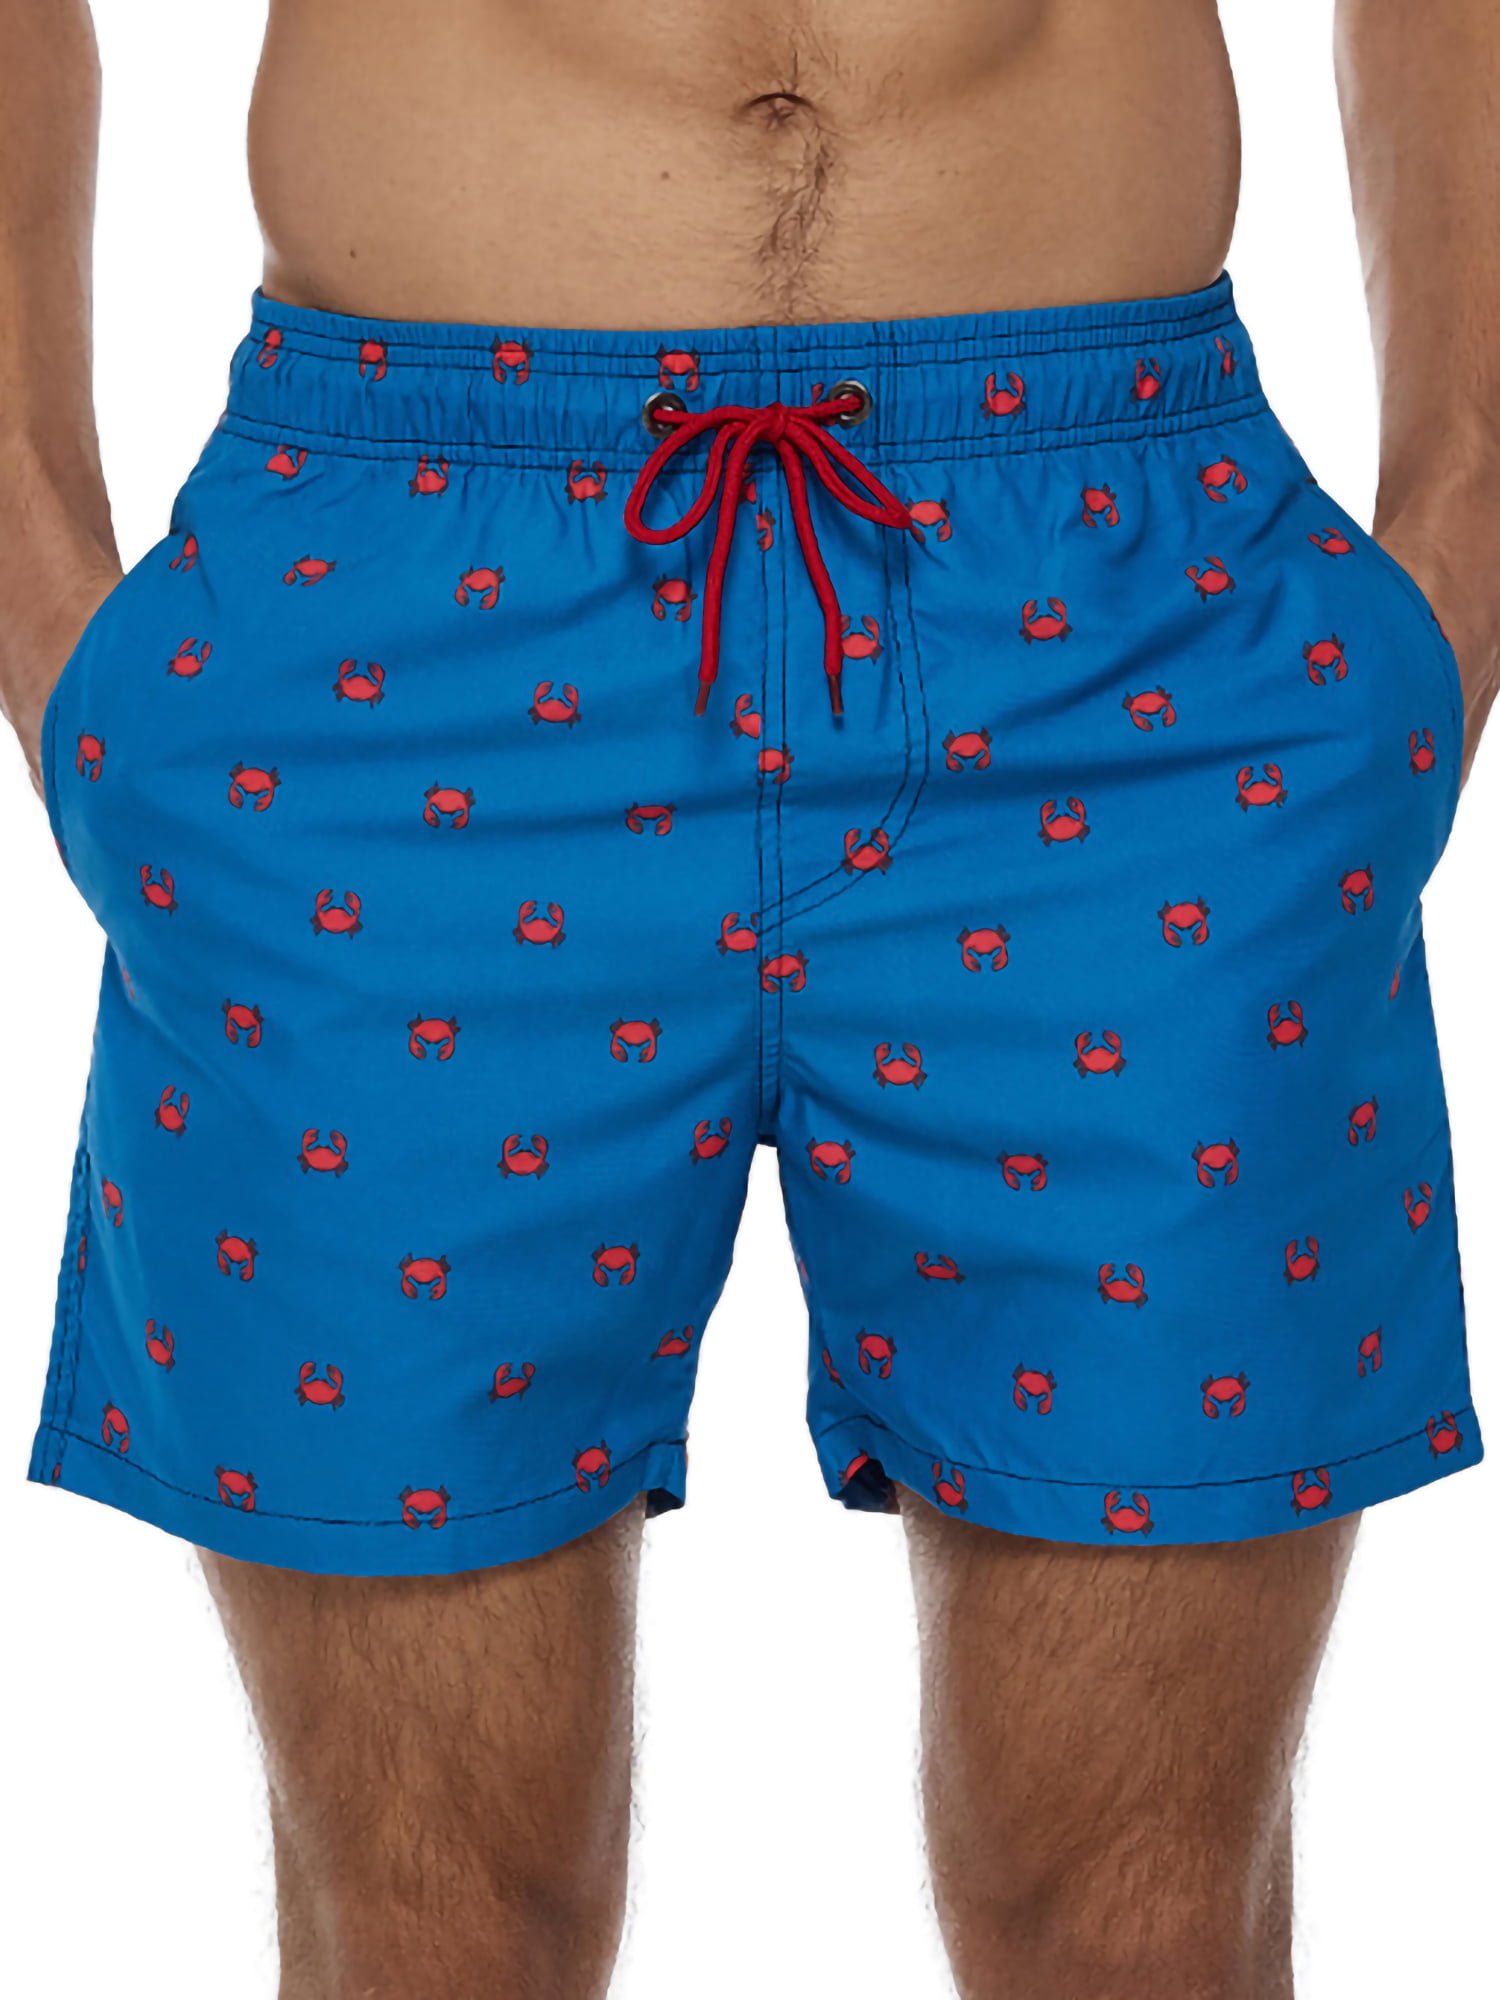 Swimming Trunks Mens Red Flamingo Loose Beach Shorts Quick Dry